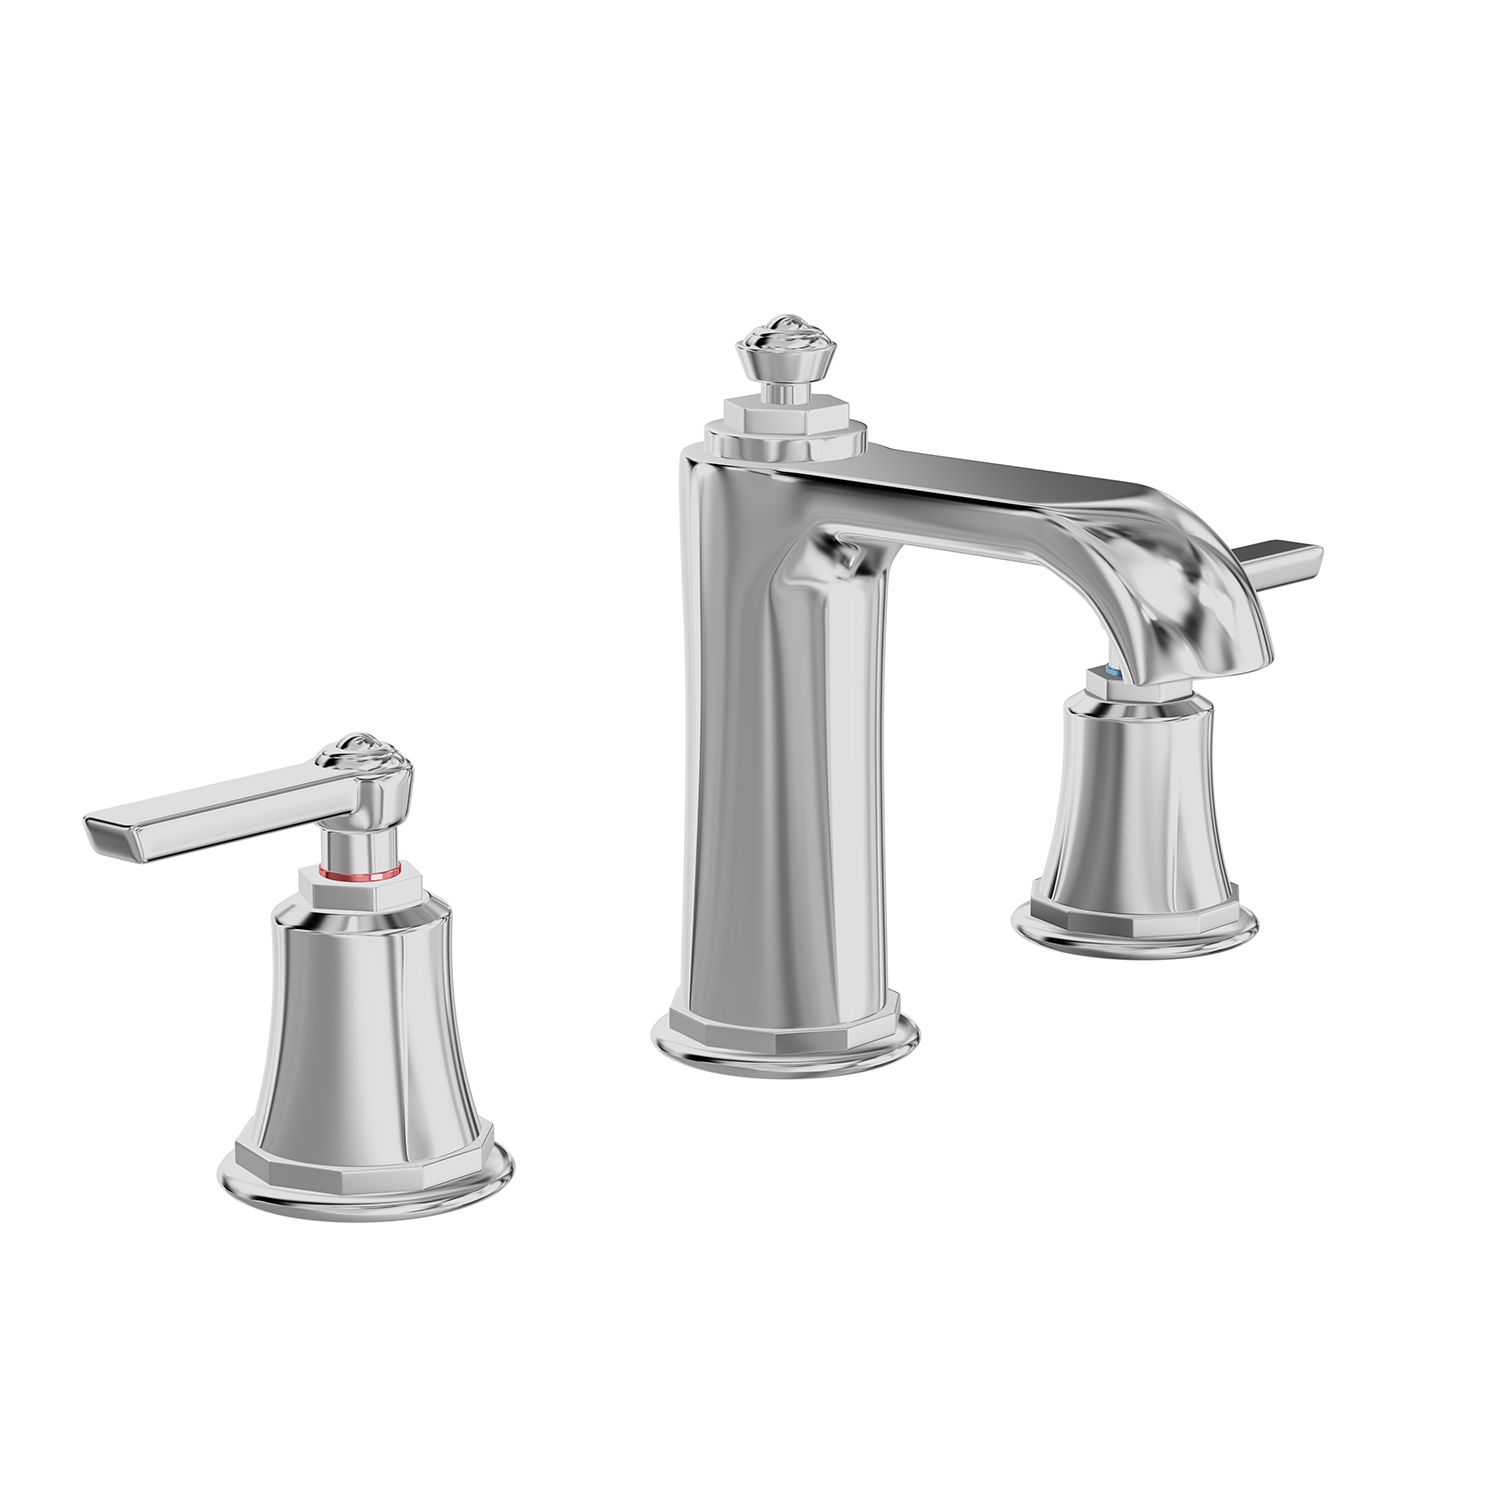 DAX Two Handle Bathroom Faucet, Brass Body, Chrome Finish, Spout Height 3-9/16 Inches (DAX-8259AC-CR)